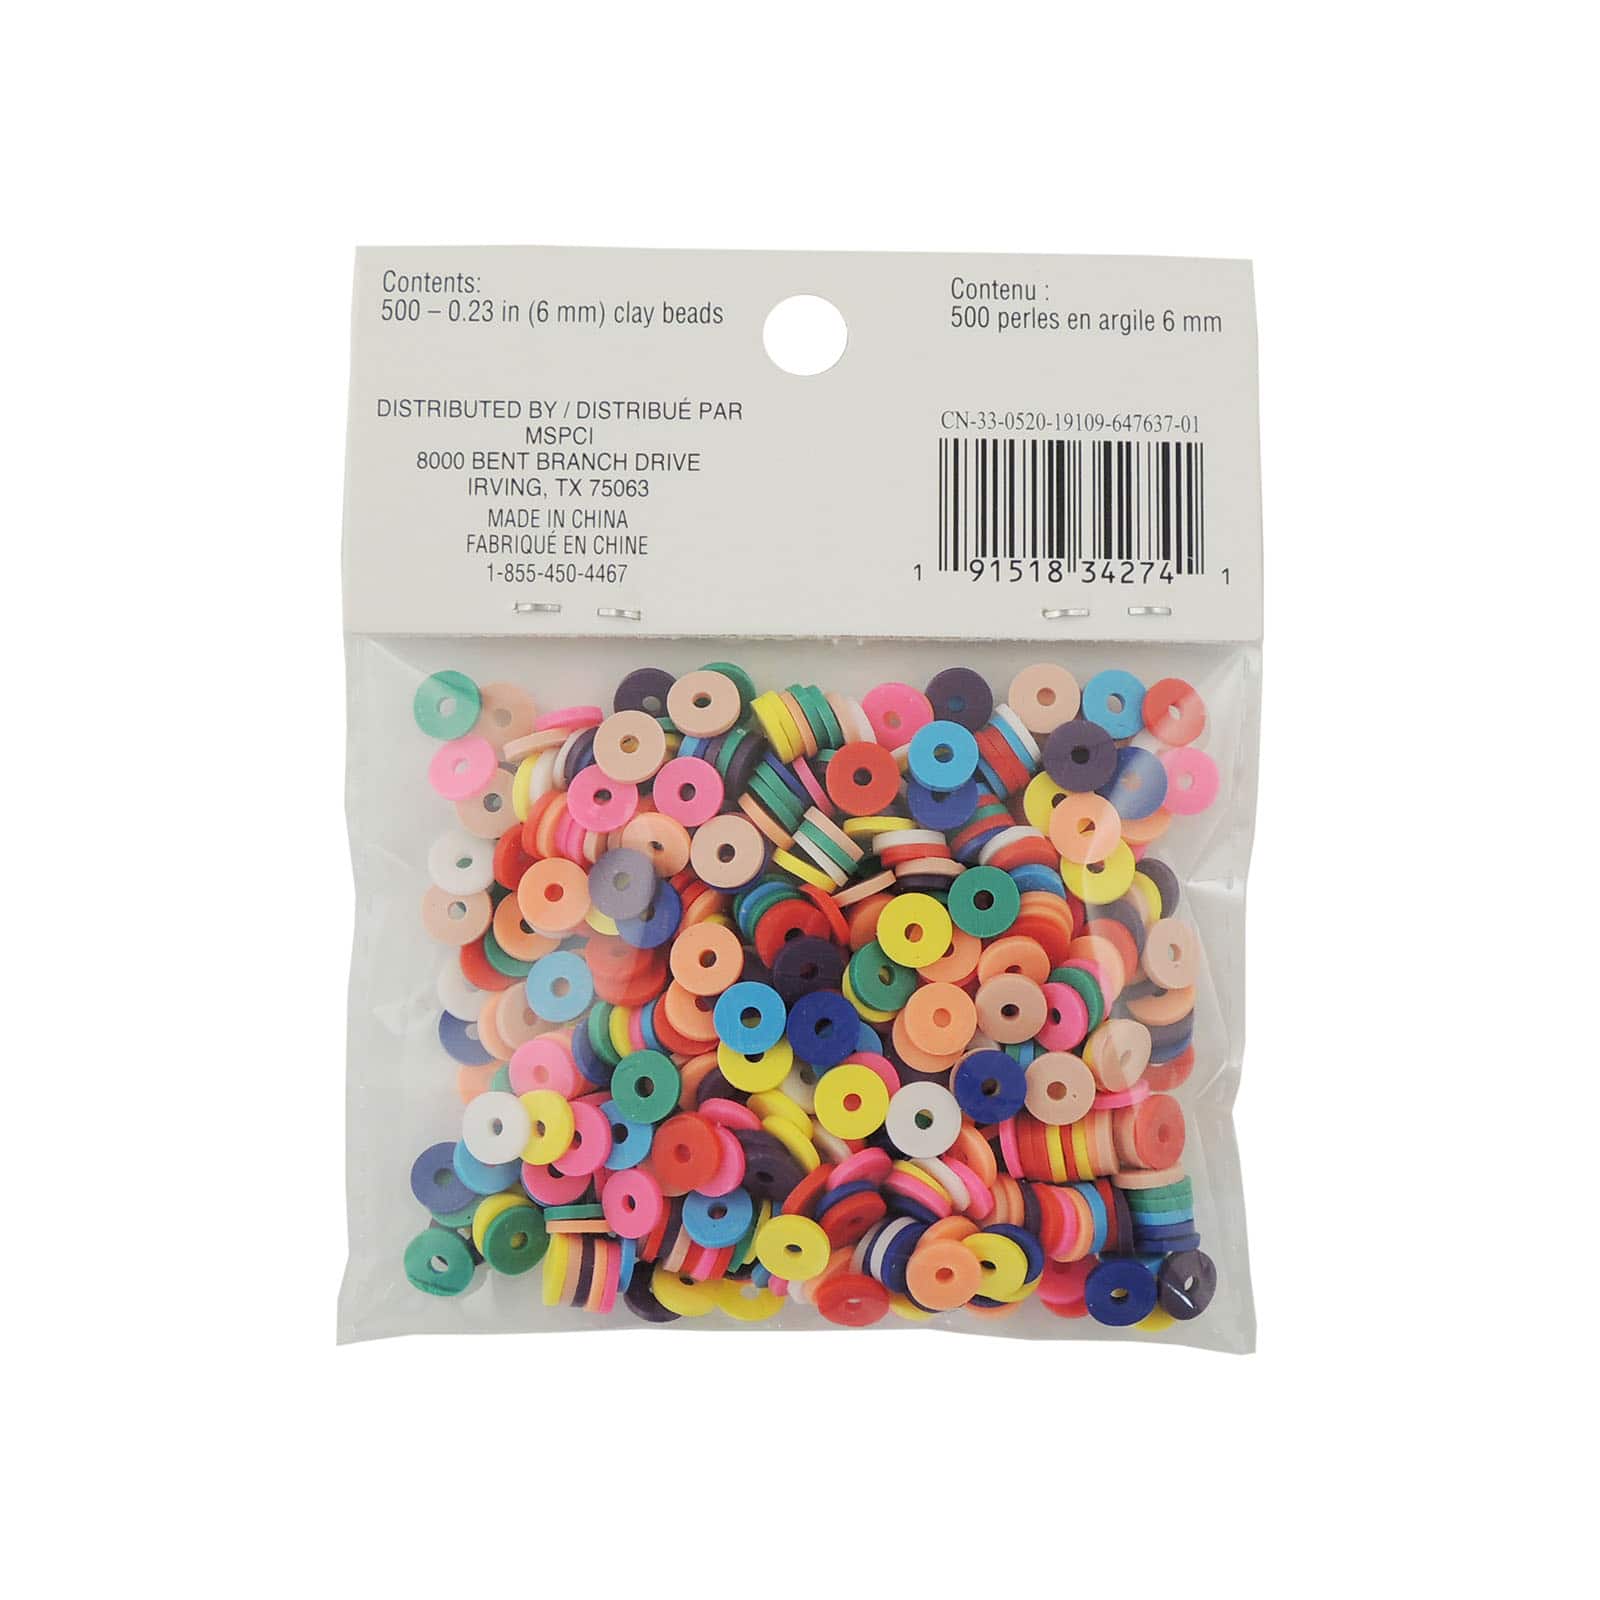 Creatology Multicolored Clay Beads - Each